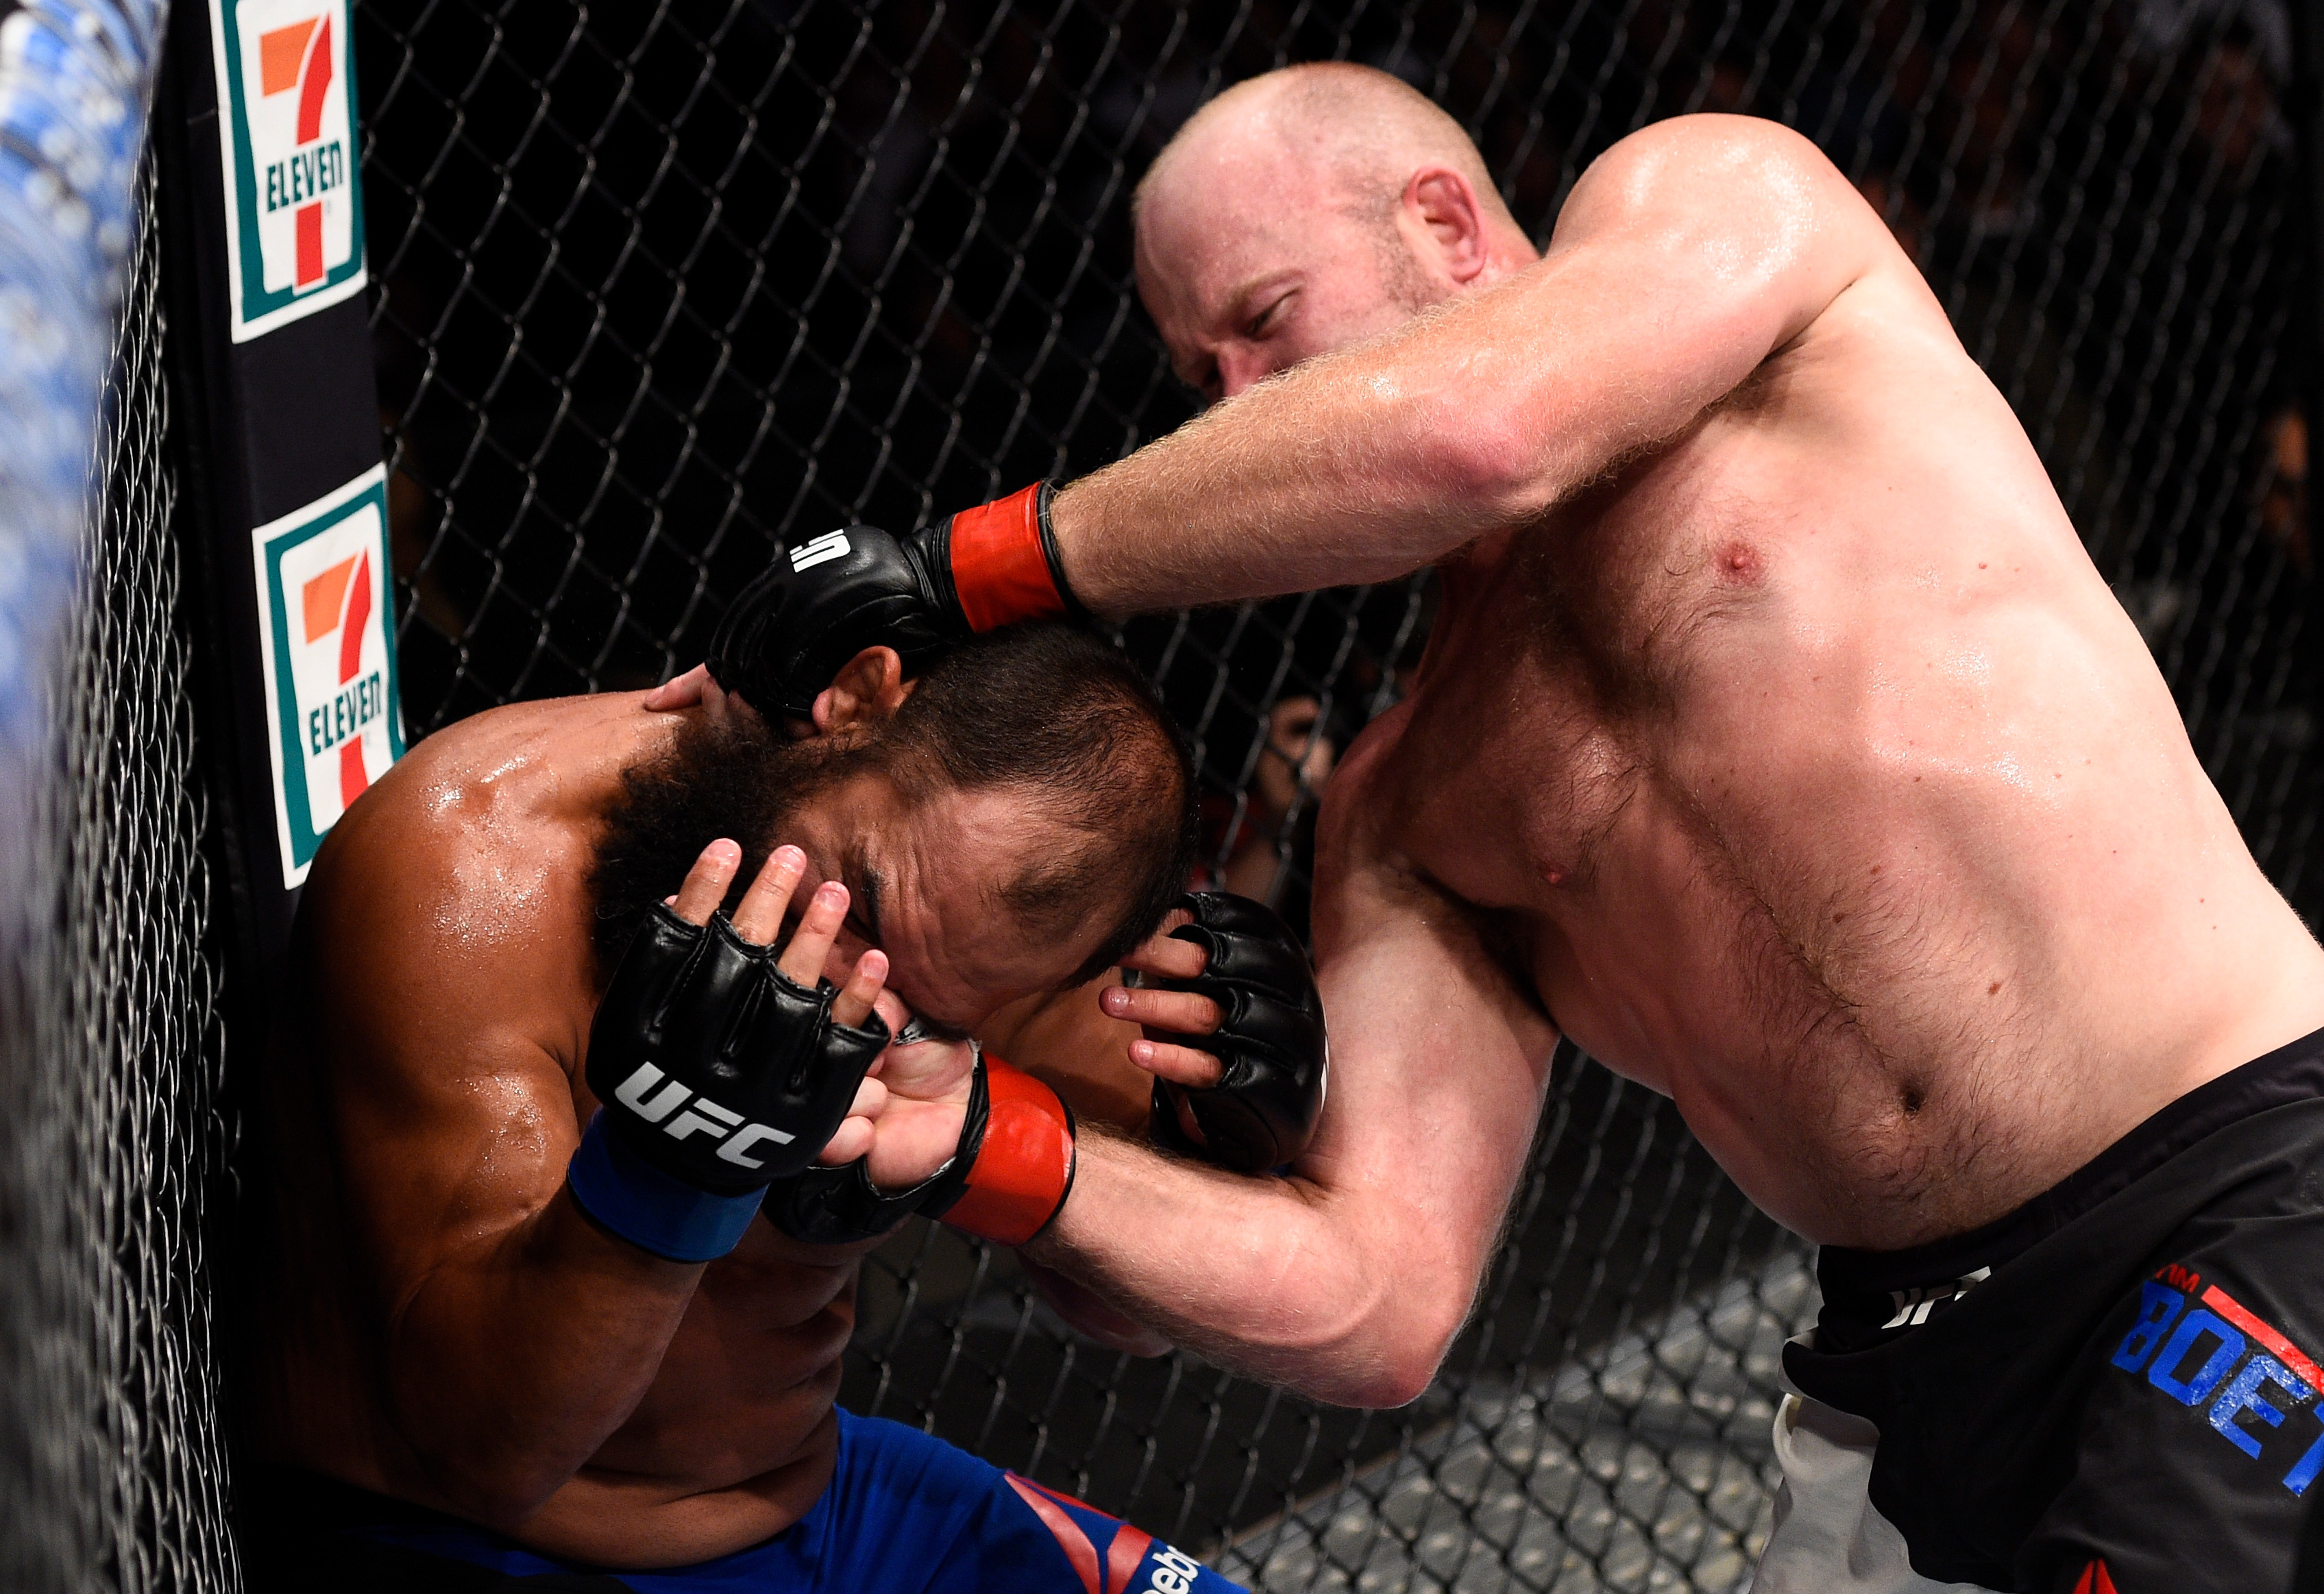 OKLAHOMA CITY, OK - JUNE 25: (R-L) <a href='../fighter/Tim-Boetsch'>Tim Boetsch</a> punches <a href='../fighter/Johny-Hendricks'>Johny Hendricks</a> in their middleweight bout during the <a href='../event/UFC-Silva-vs-Irvin'>UFC Fight Night </a>event at the Chesapeake Energy Arena on June 25, 2017 in Oklahoma City, Oklahoma. (Photo by Brandon Magnus/Zuffa LLC/Zuffa LLC via Getty Images)“ align=“center“/><br />Tim Boetsch isn’t the most active when it comes to social media. He darts in and out and makes his posts, but he’s not one of those Tweet-a-minute guys. “The Barbarian” did show up on February 2, though, posting a commemorative ticket from the night ten years earlier when he debuted in the UFC with a stirring first-round finish of <a href=